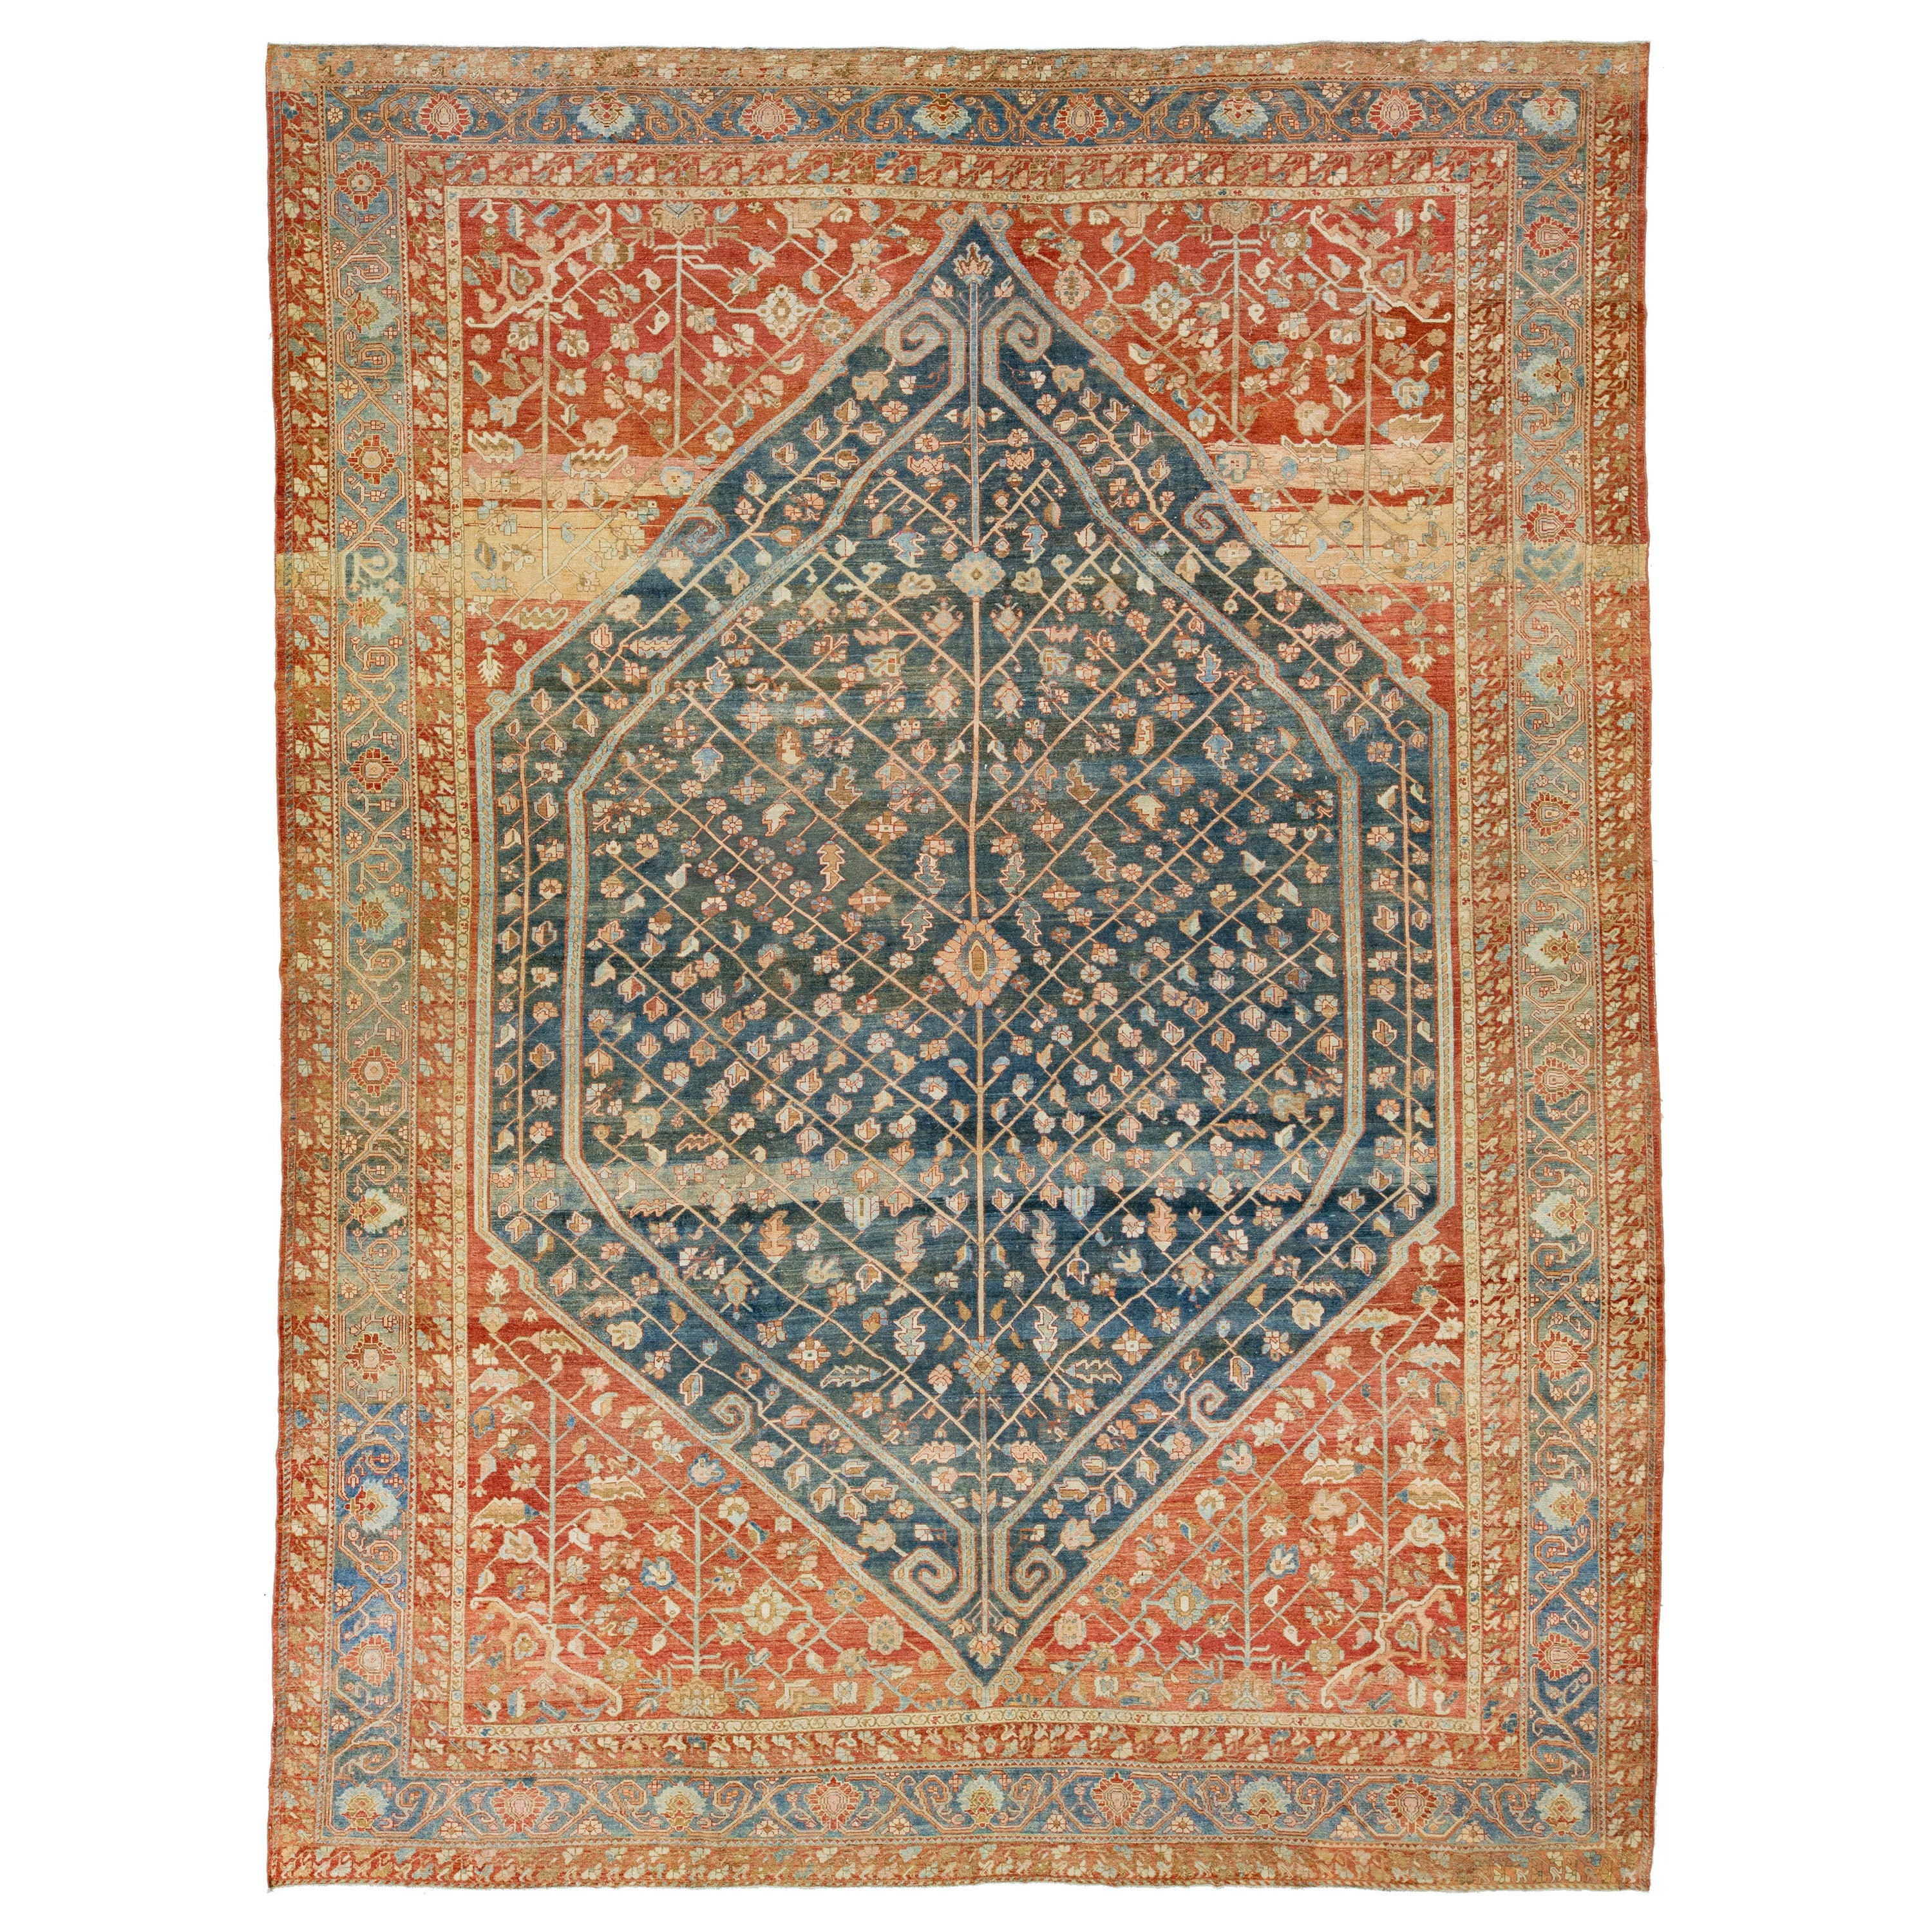 Allover 1920s Antique Persian Bakhtiari Wool Rug In Blue & Red-Rust Color  For Sale